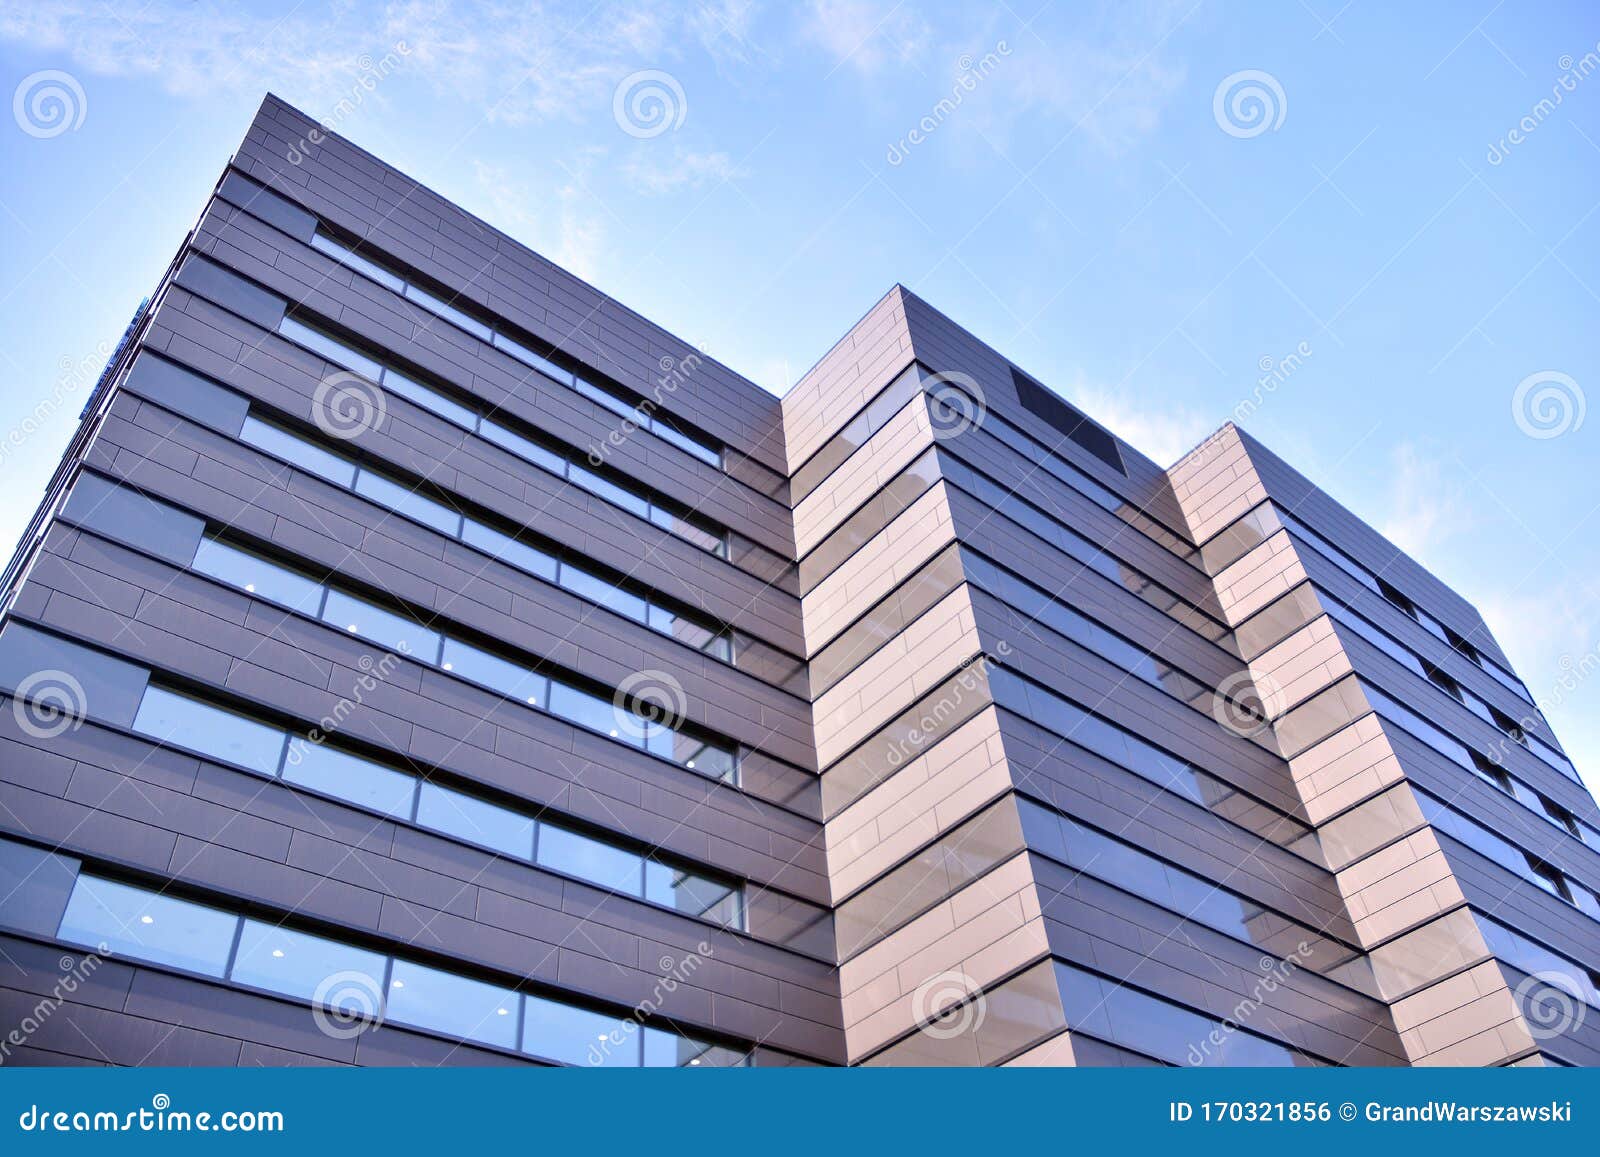 A View at a Straight Facade of a Modern Building with a Dark Grey ...